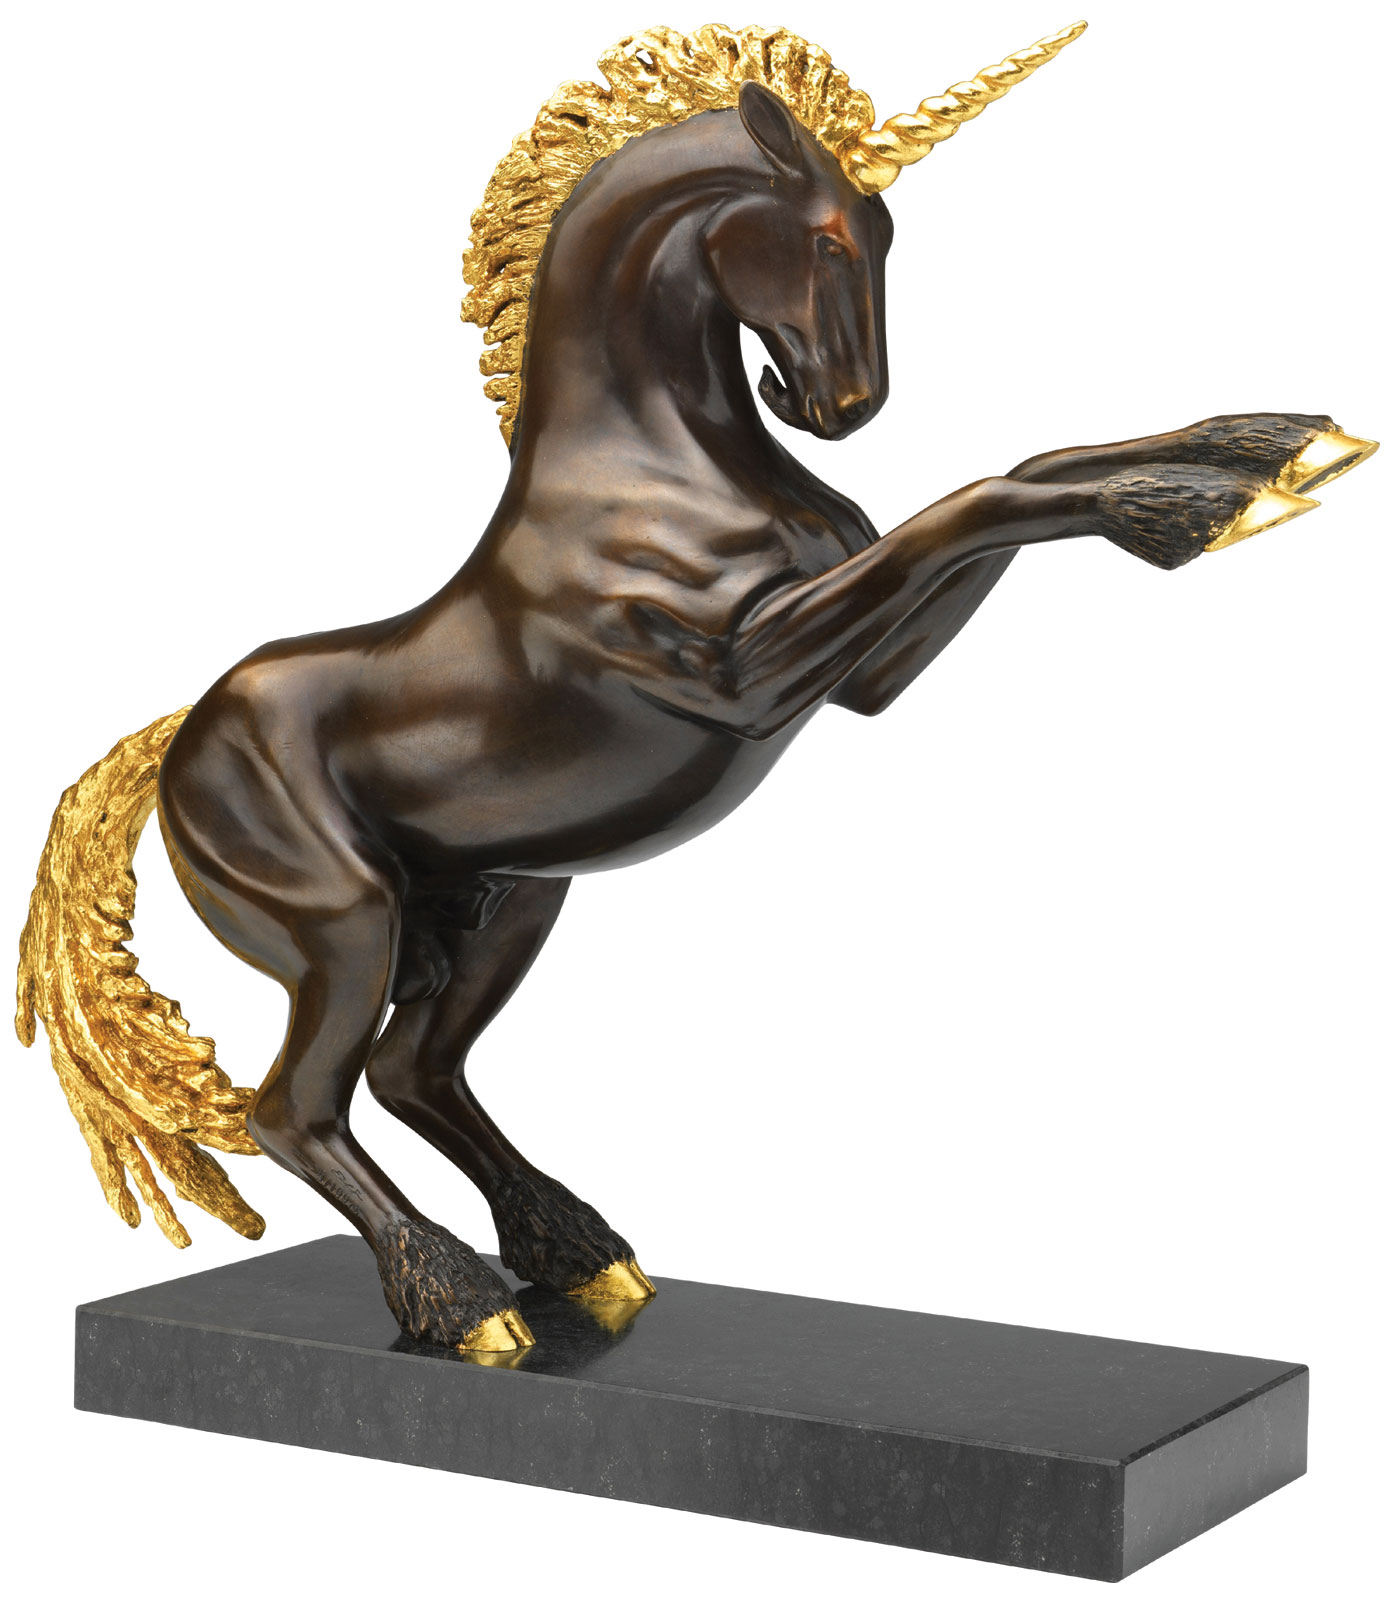 Sculpture "Unicorn" (2015), bronze version partially gold-plated by Joseph F. Askew